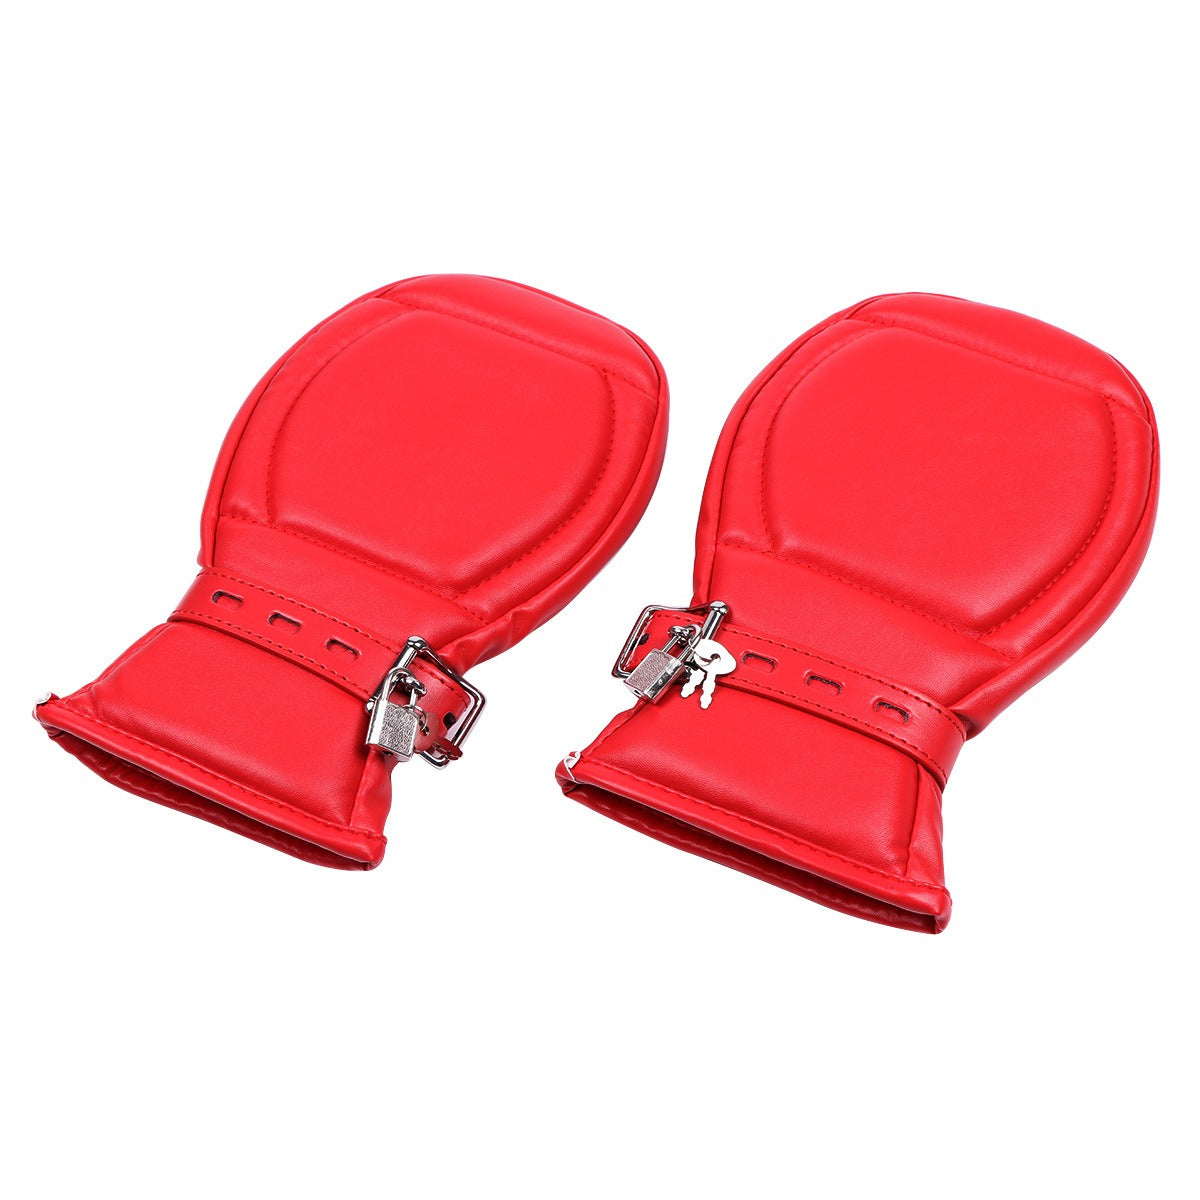 PADDED PUP PAW LOCKABLE MITTS - Red - Pup Hood UK